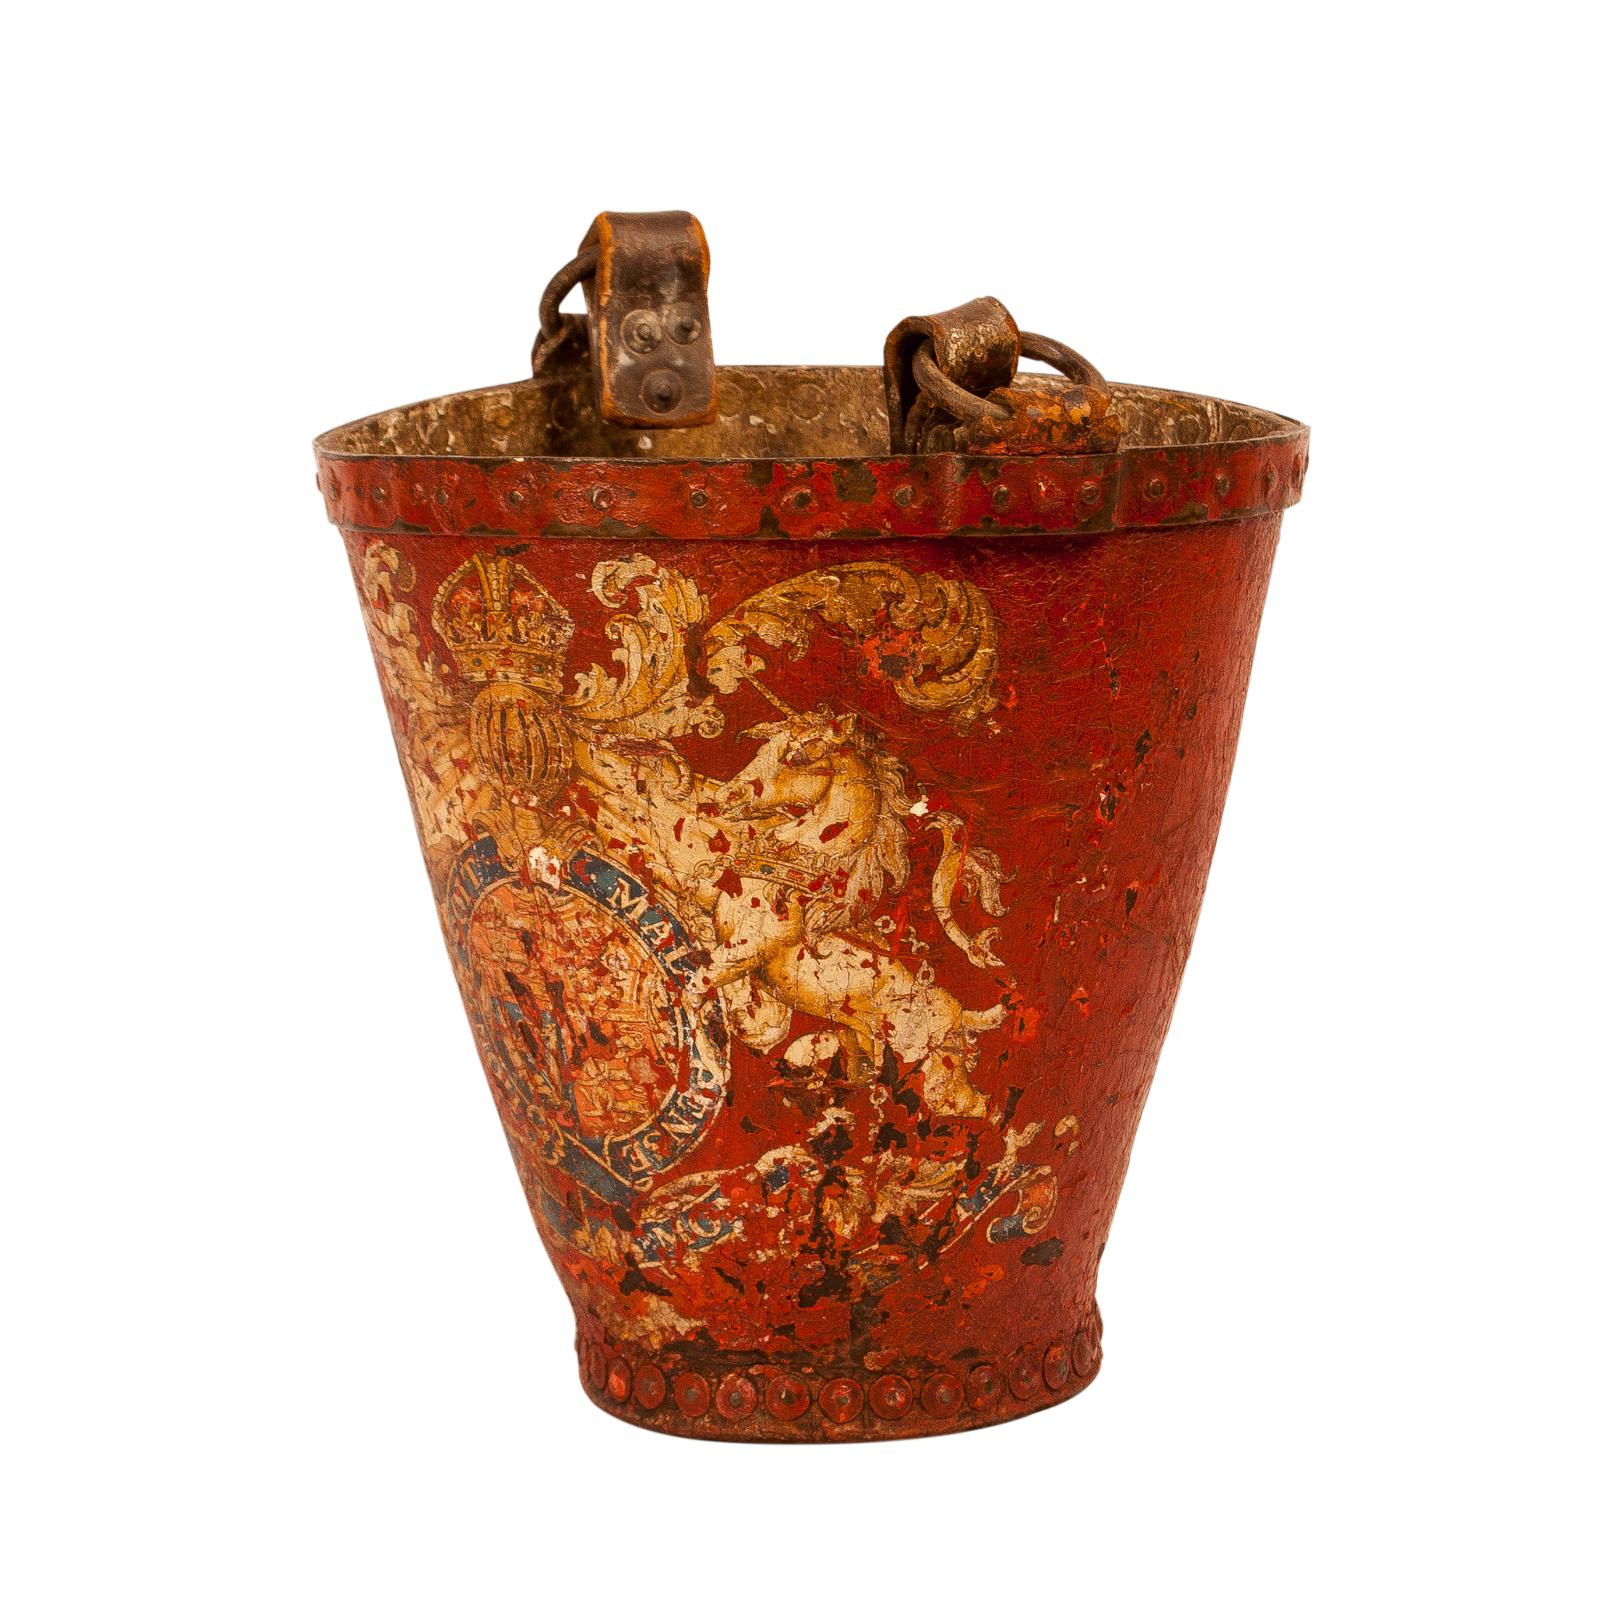 British George III Period Red Leather Fire Bucket, England, circa 1780 Late 18th Century